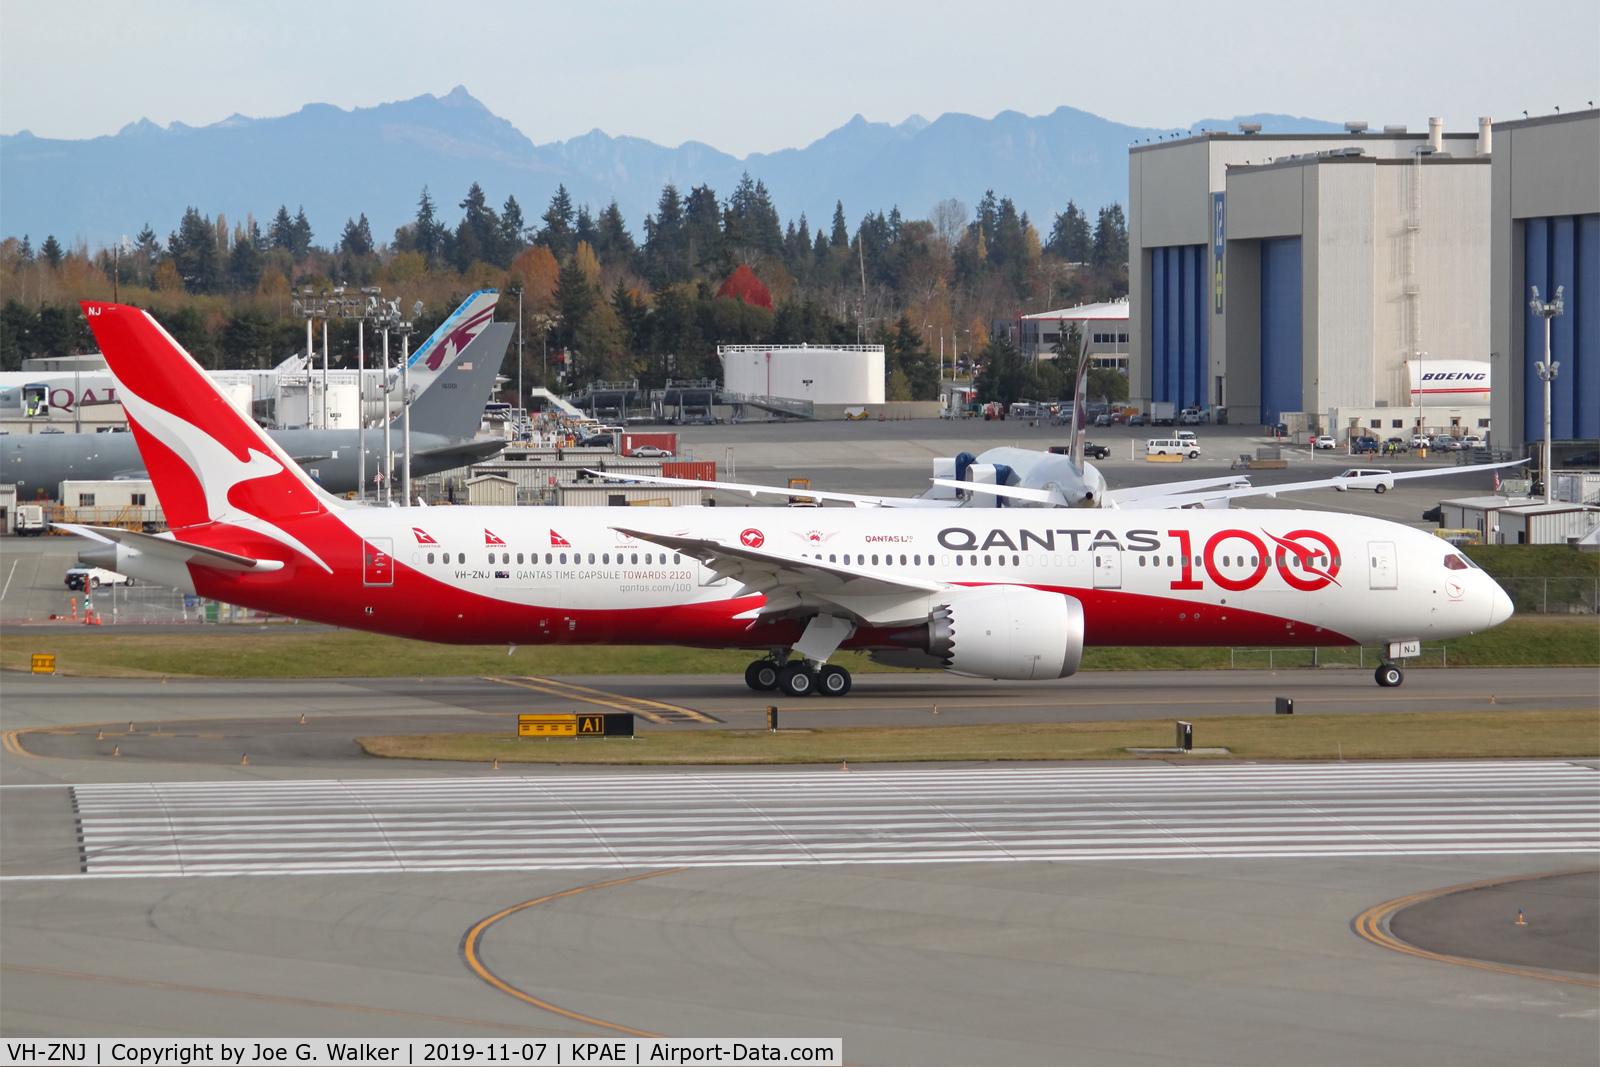 VH-ZNJ, 2019 Boeing 787-9 Dreamliner Dreamliner C/N 66074, Special 100 Year Anniversary livery seen on the 10th 787-9 for Qantas.